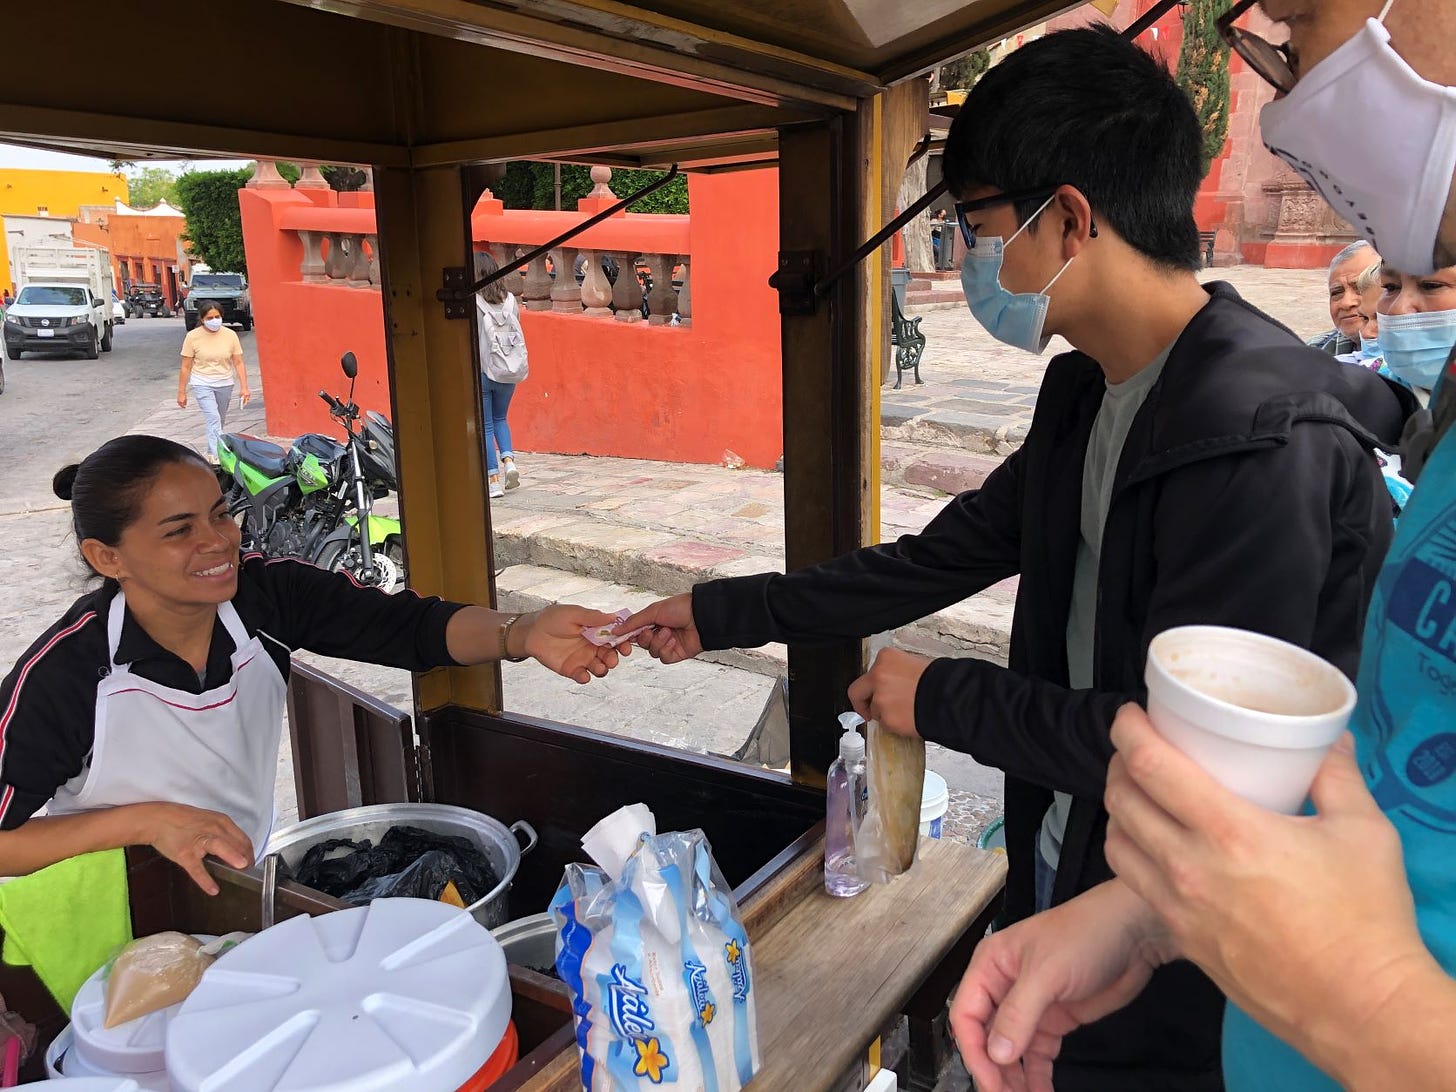 buying food from a street vendor in mexico